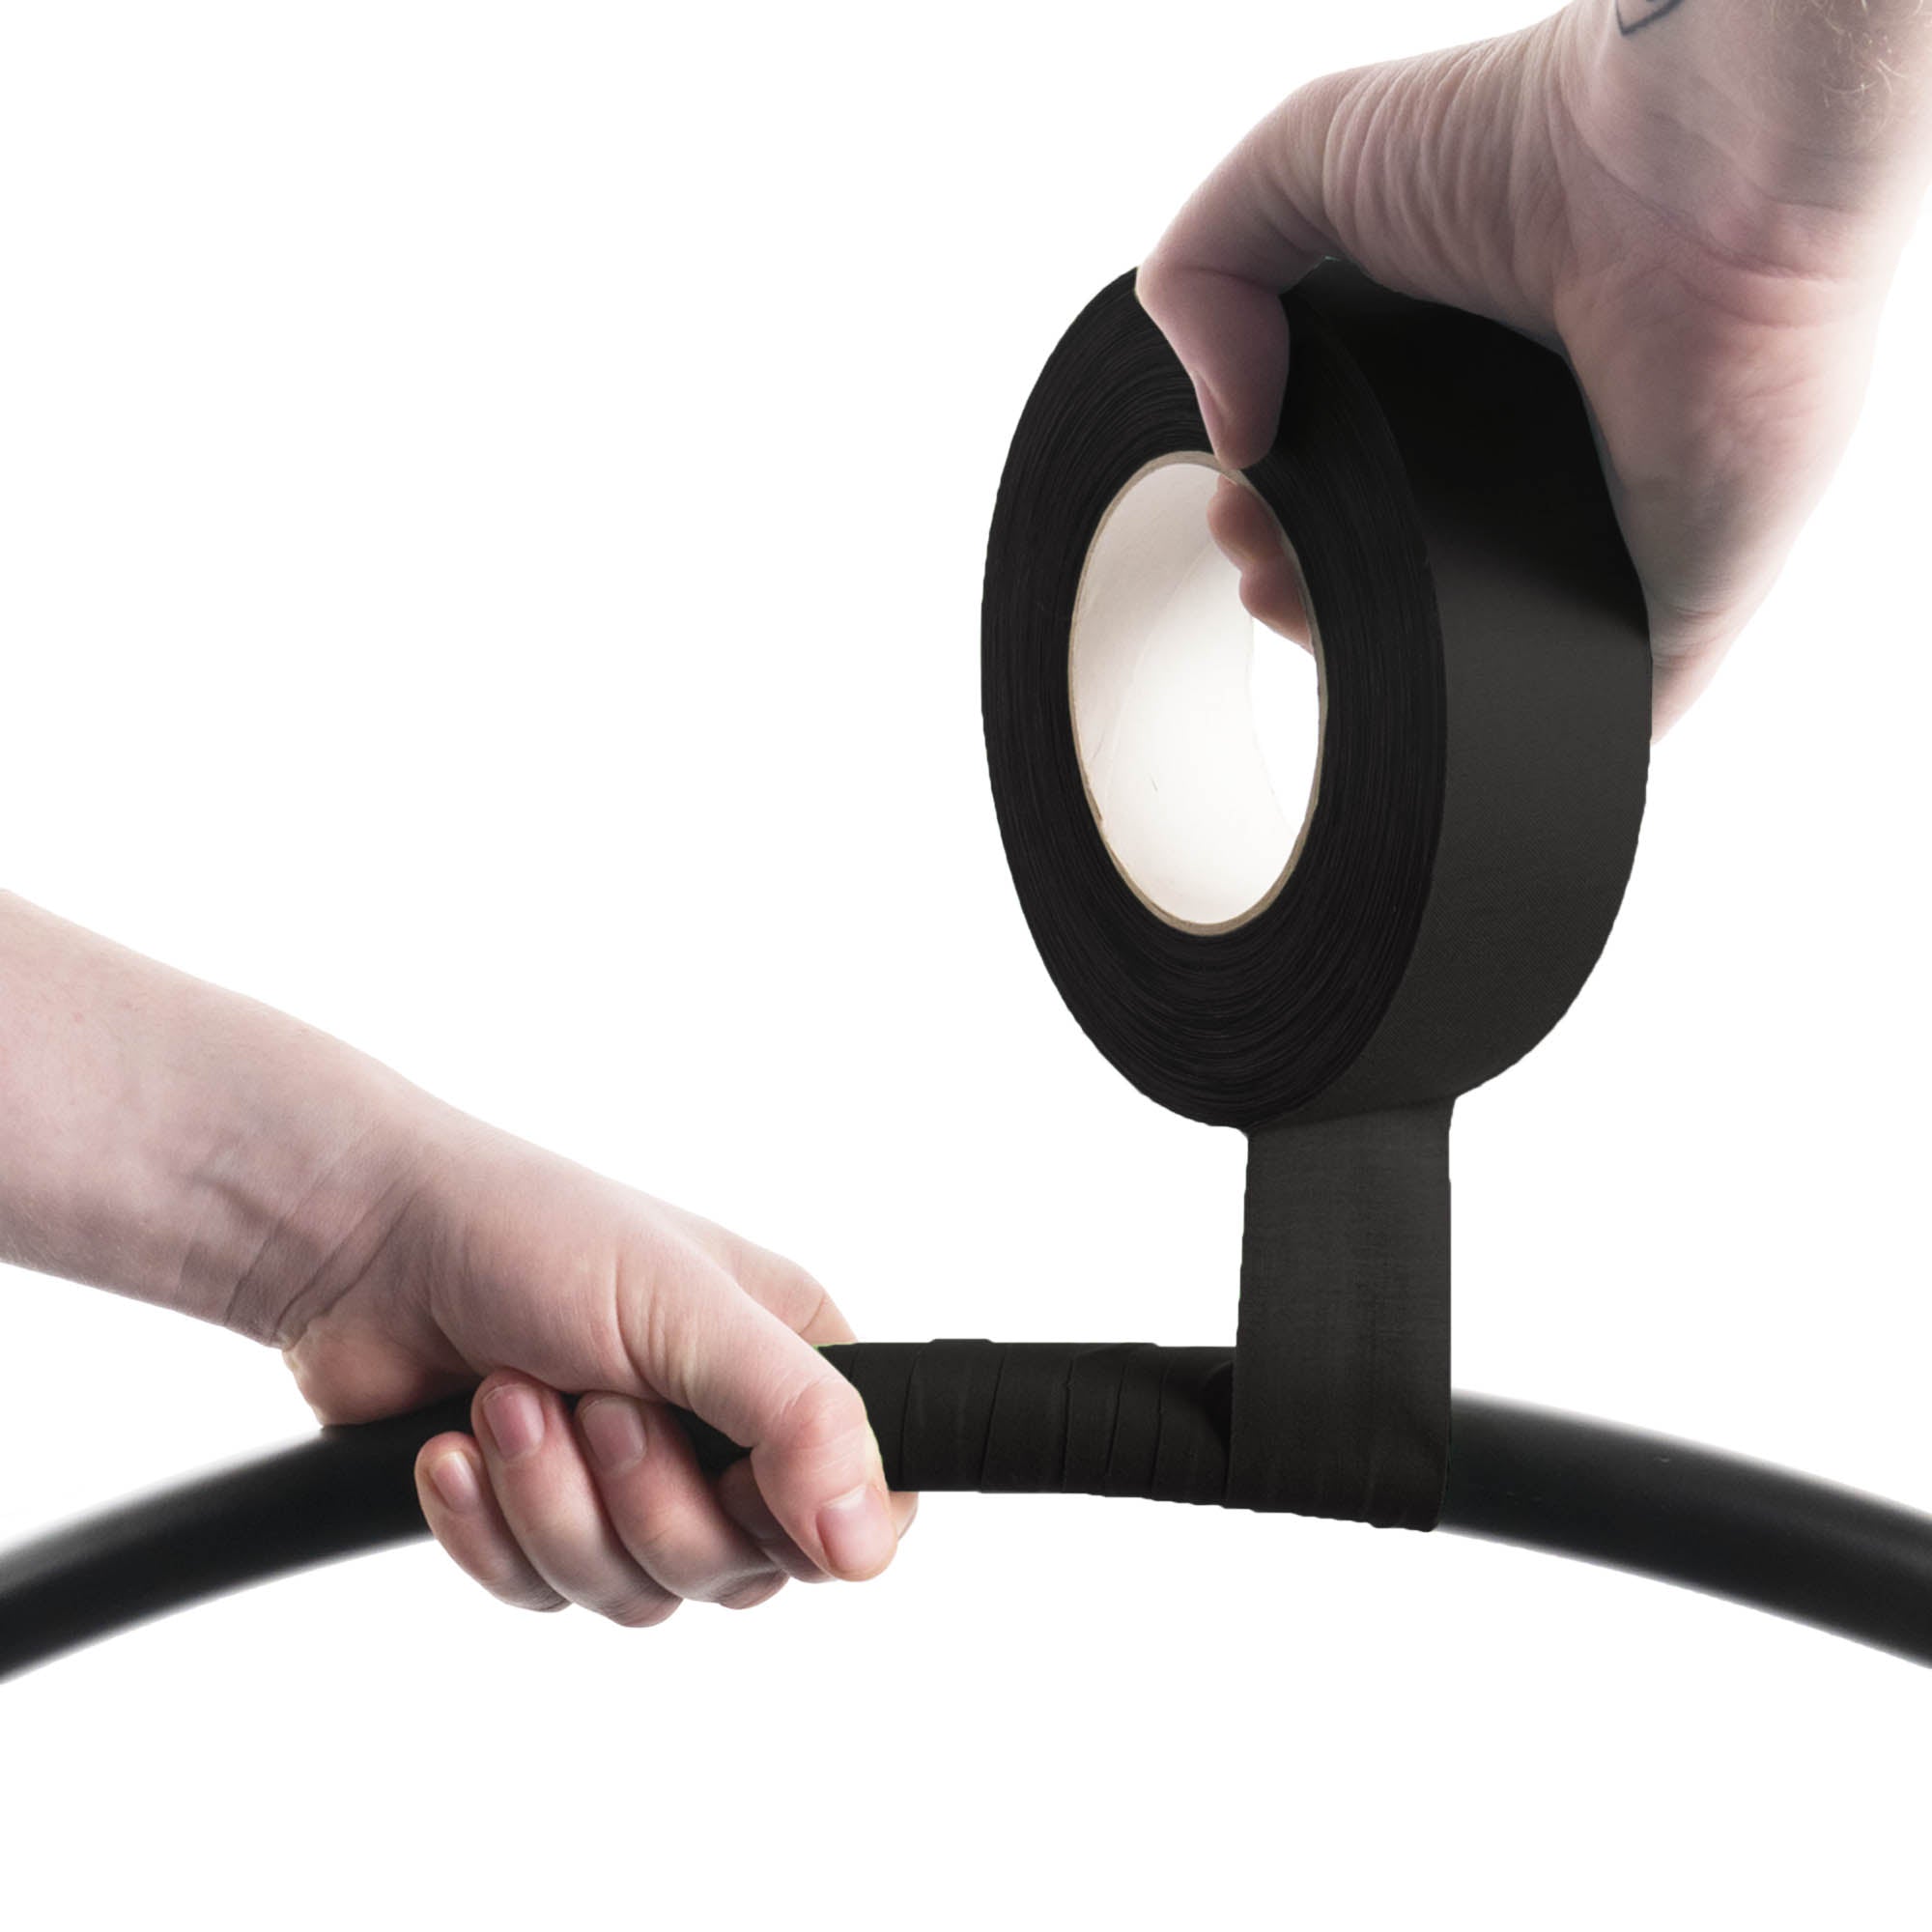 taping a hoop with black 3.8cm wide tape